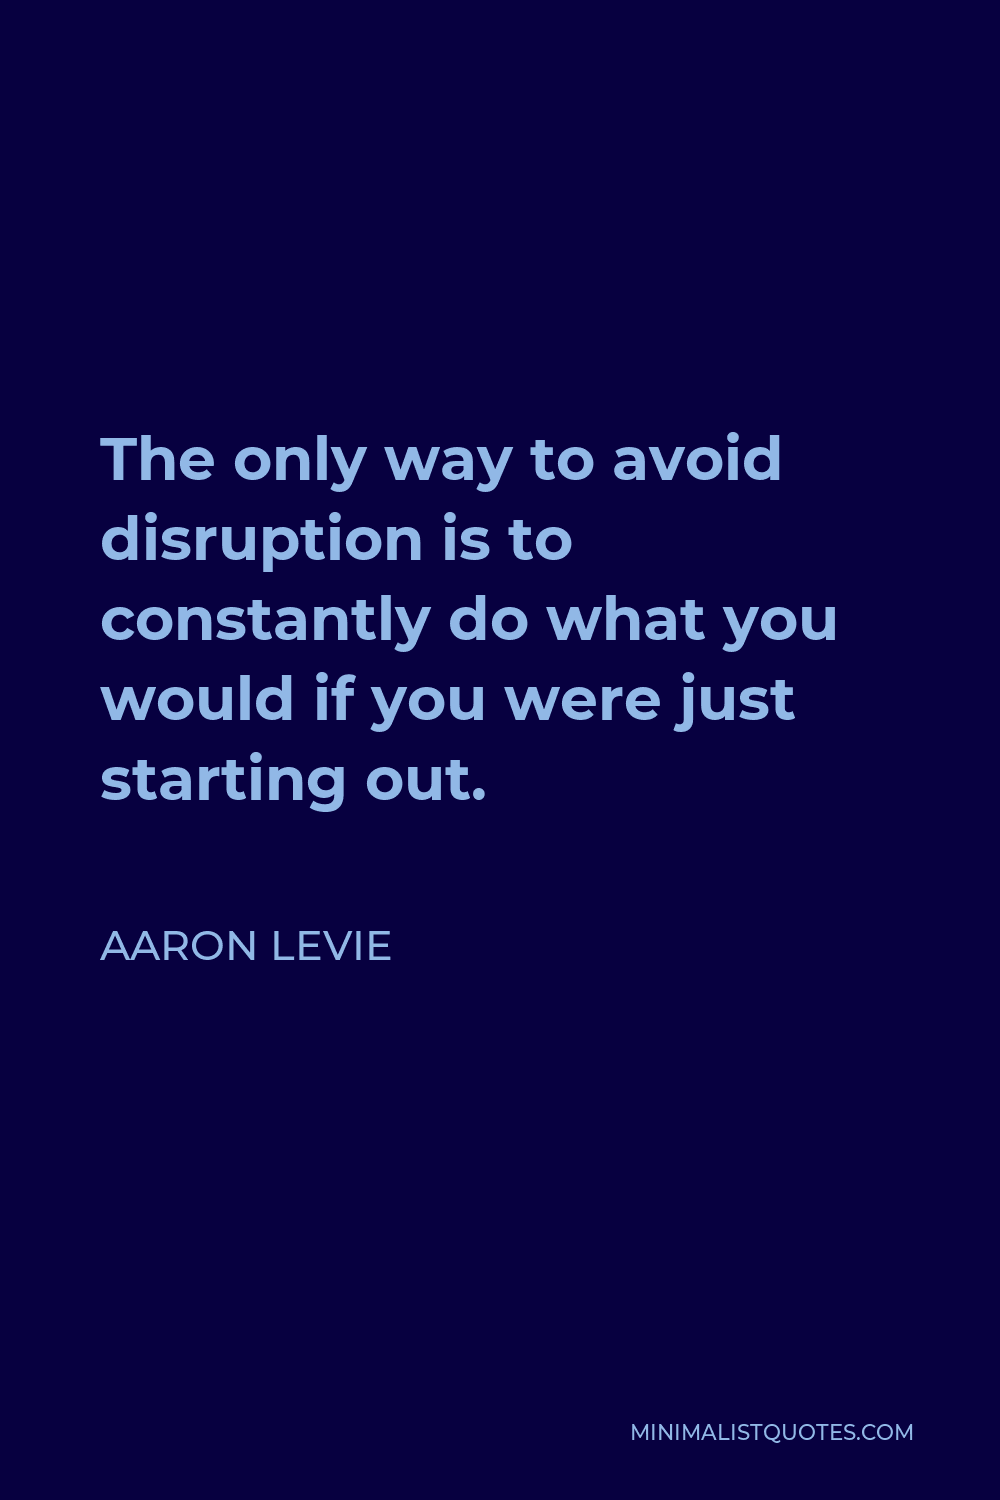 Aaron Levie Quote - The only way to avoid disruption is to constantly do what you would if you were just starting out.